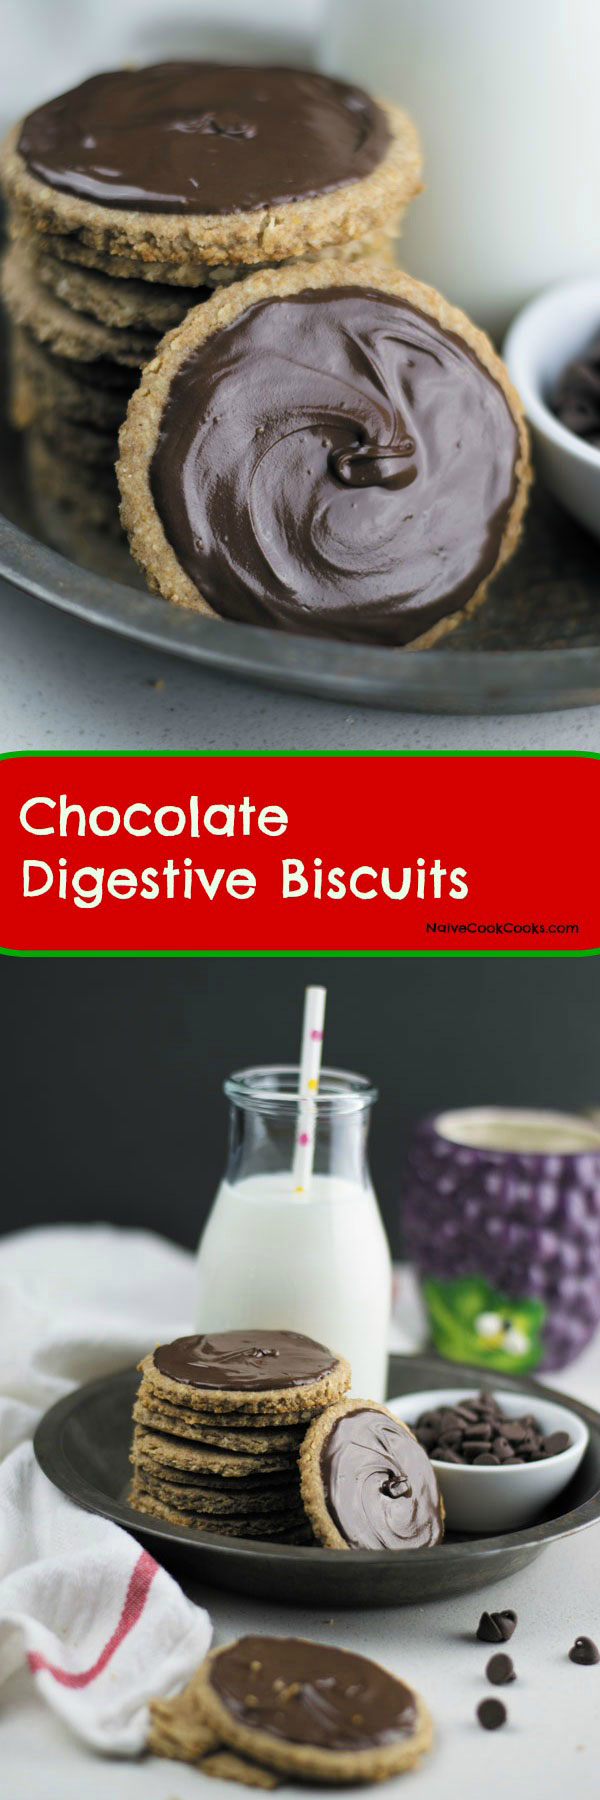 digestive biscuits ready to eat long pin